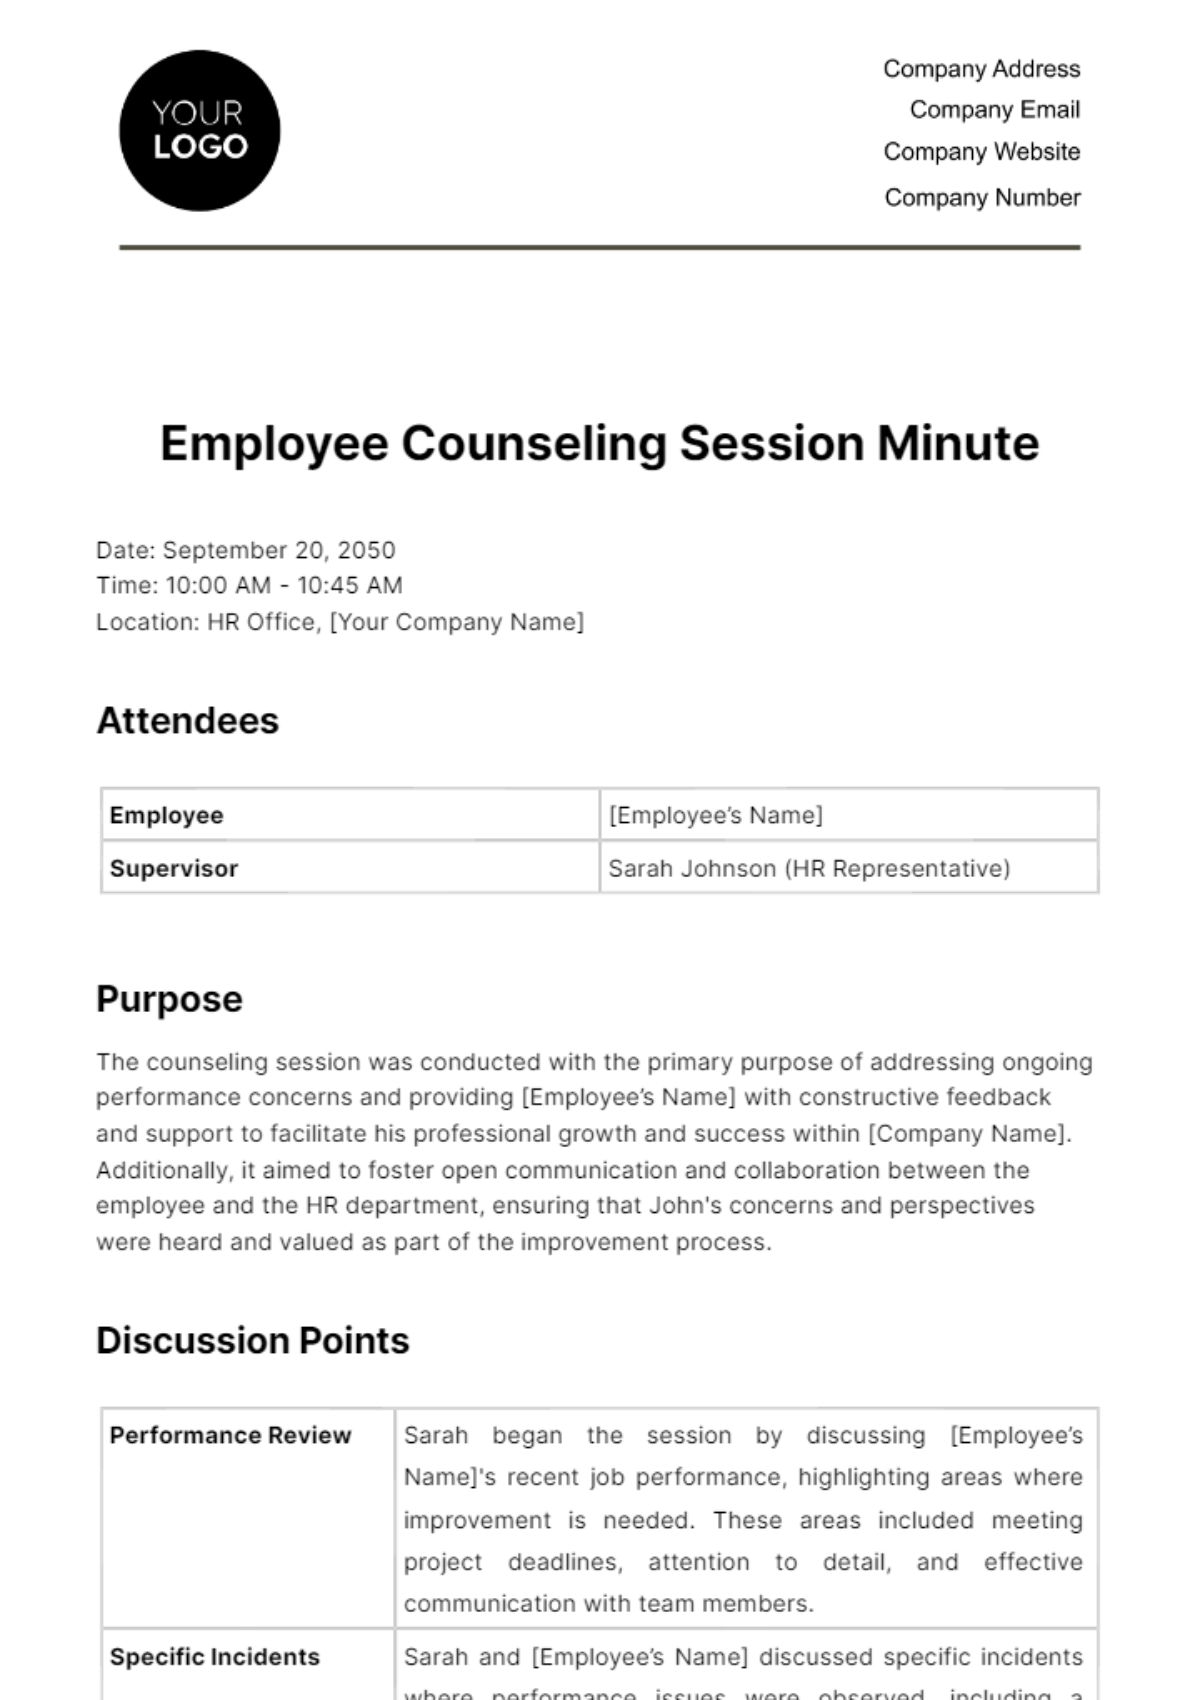 Employee Counseling Session Minute HR Template